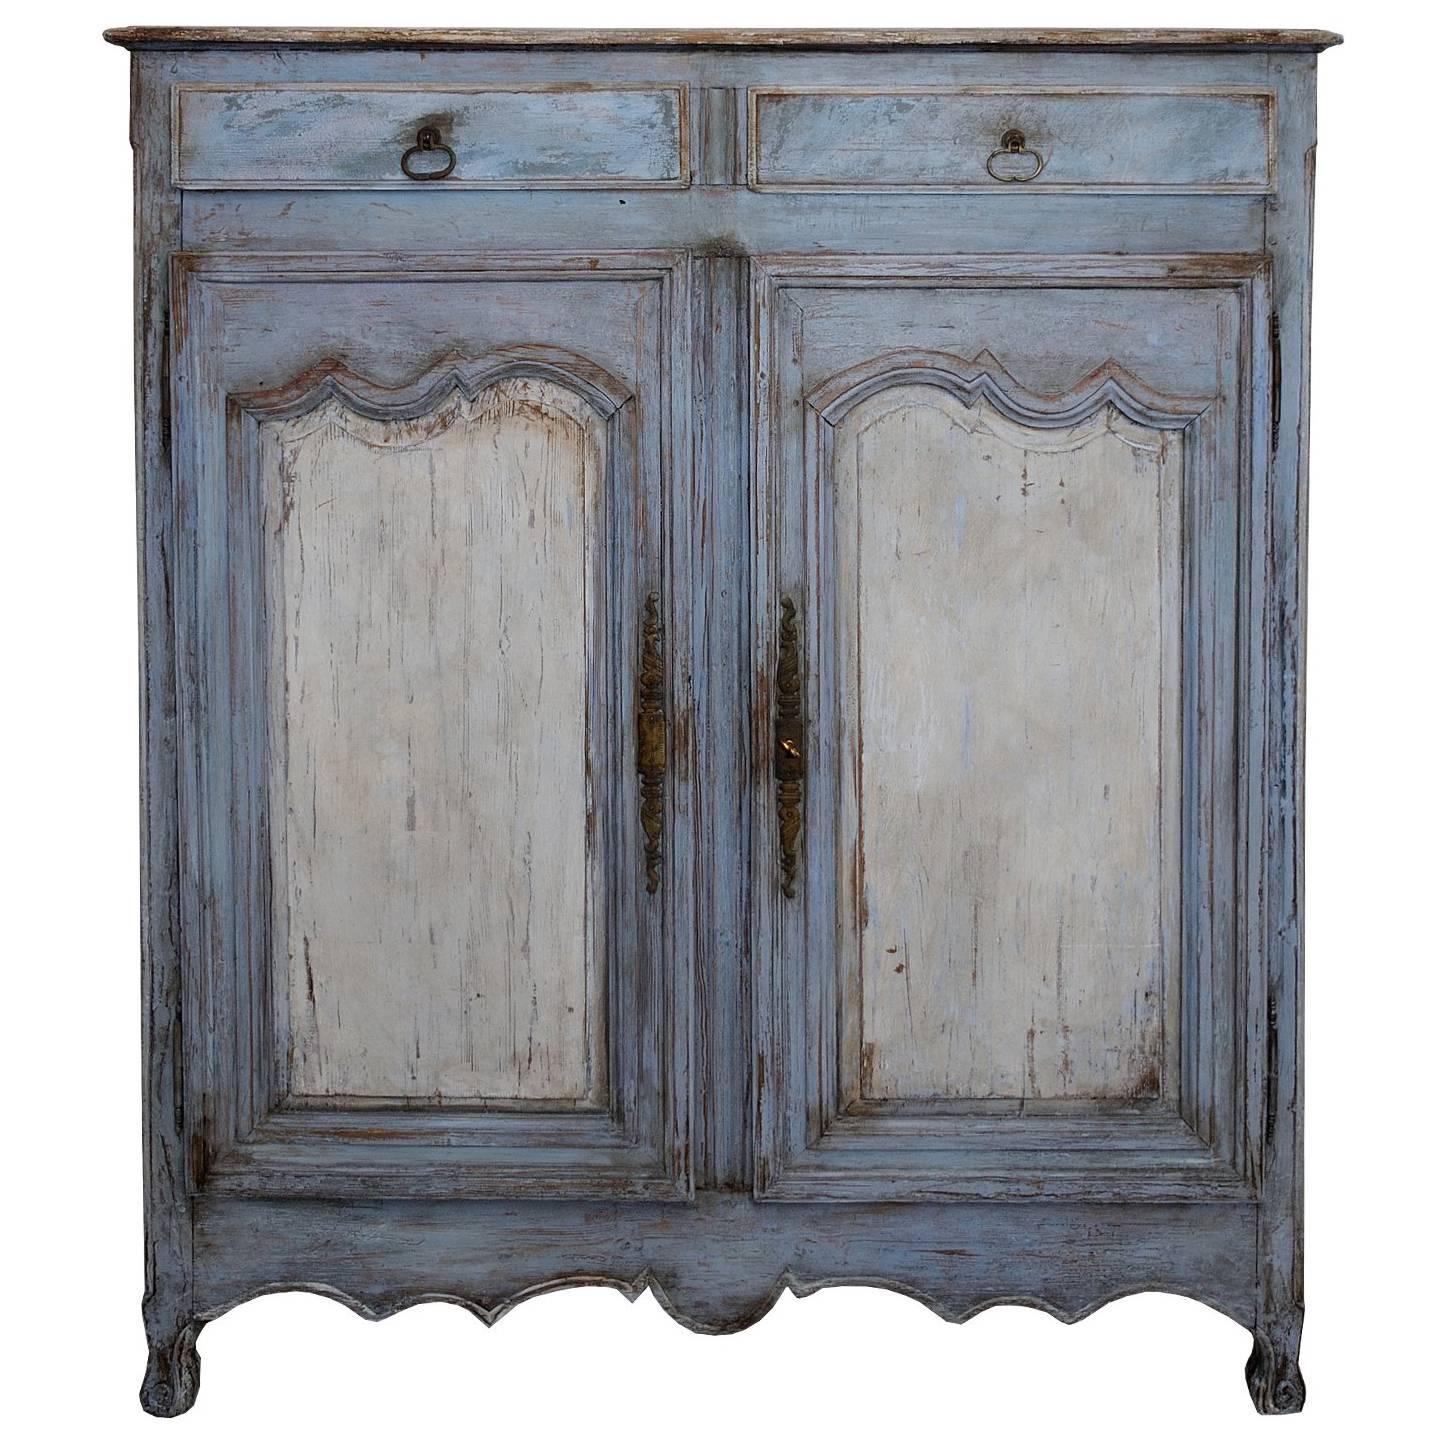 French Mid-18th Century Louis XV Small Painted Cupboard or Armoire, circa 1760